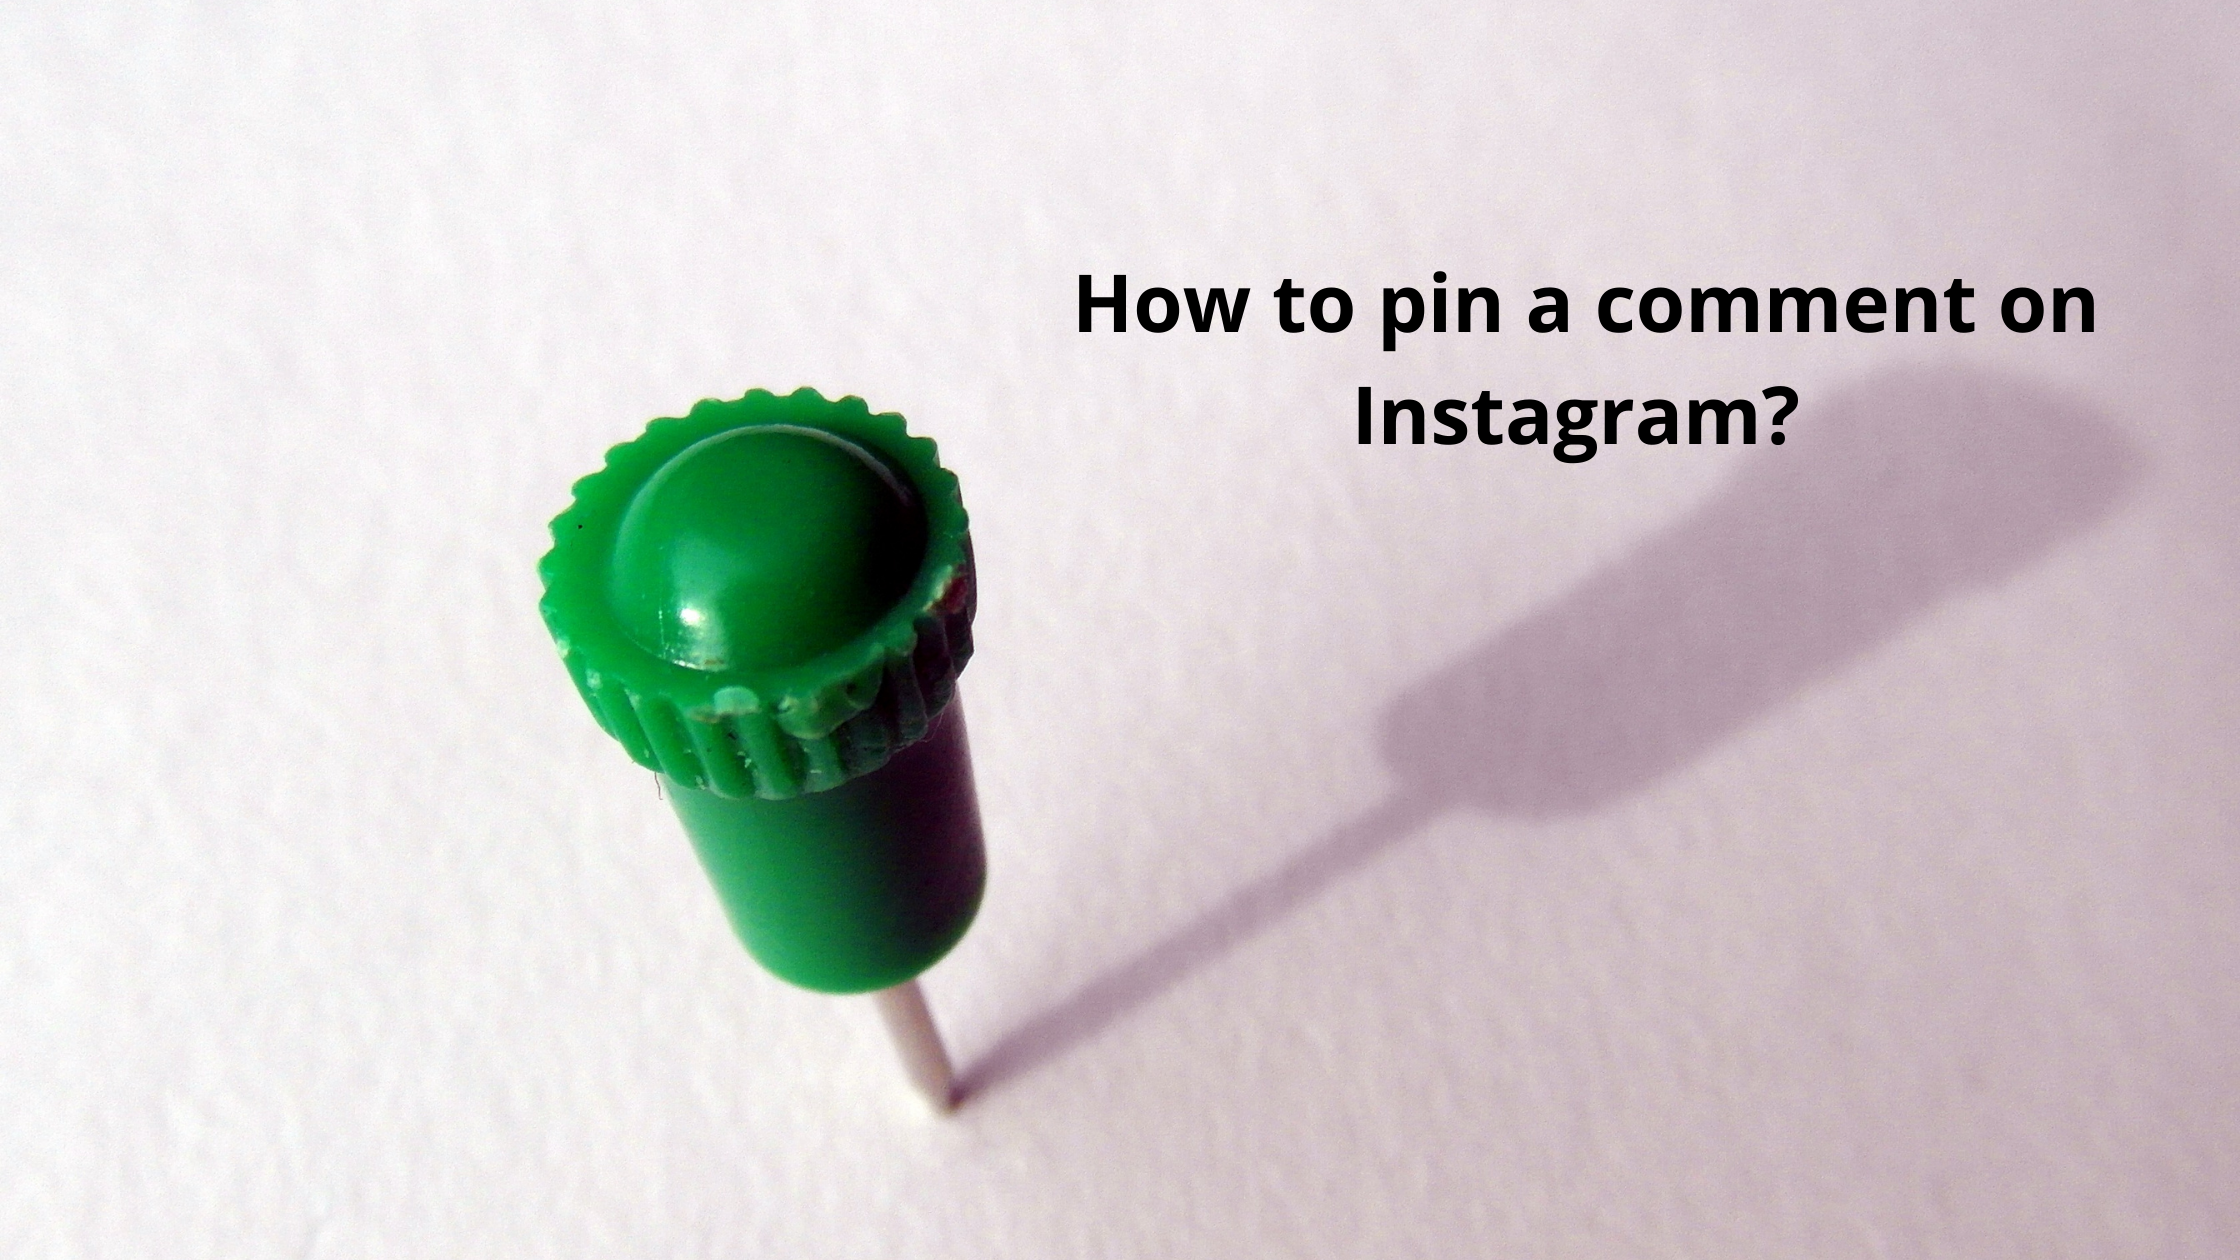 How to pin a comment on Instagram?